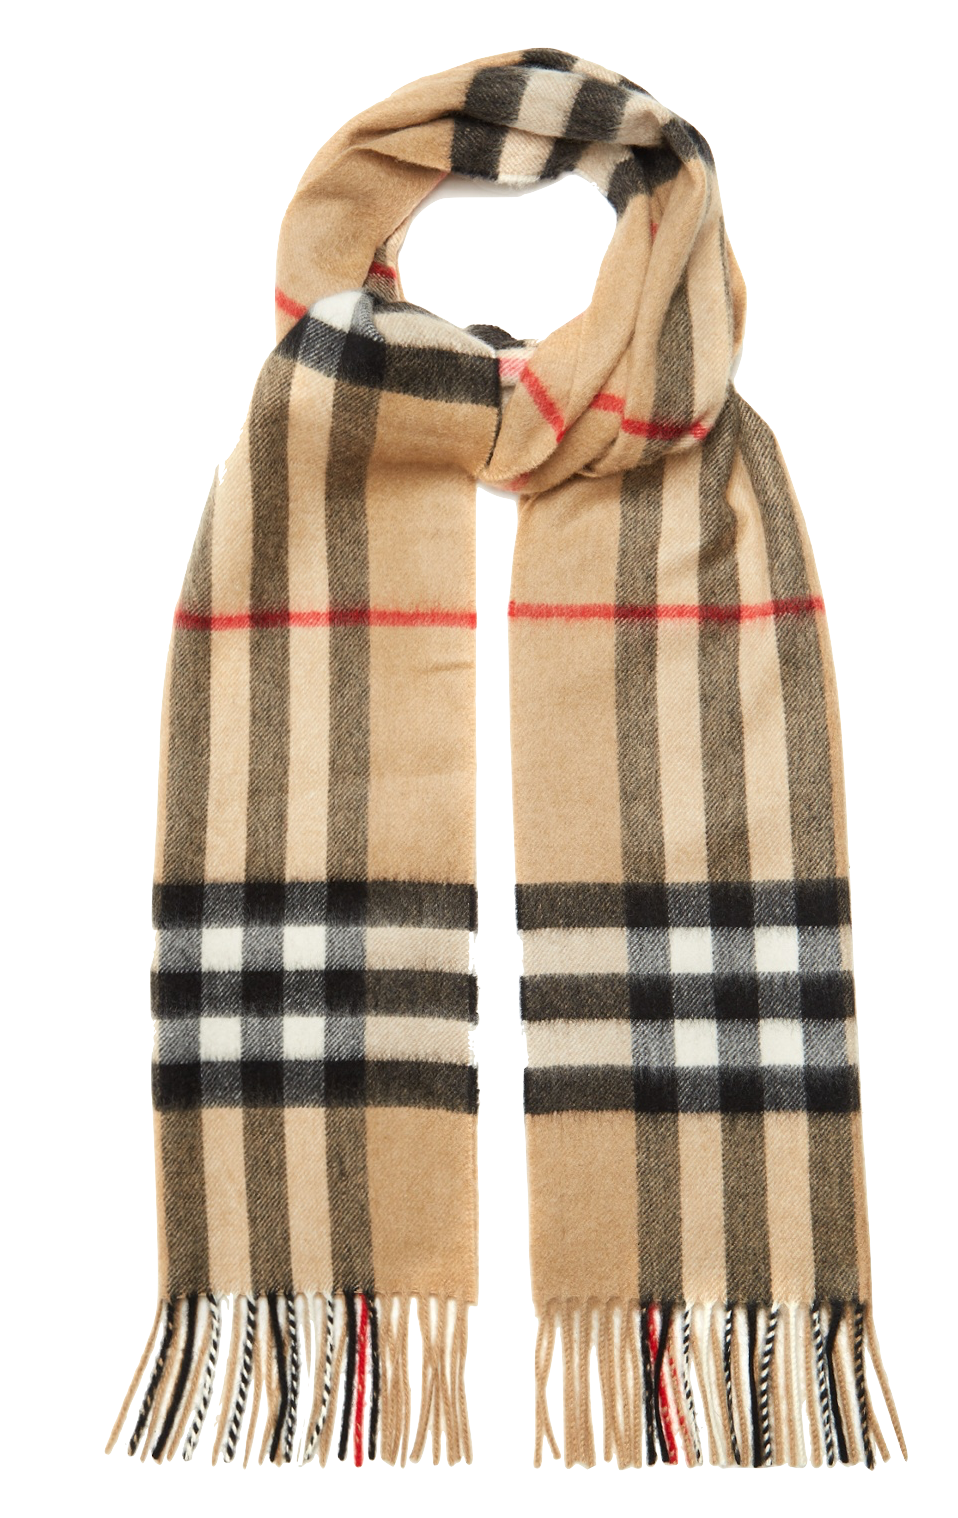 best place to buy burberry scarf